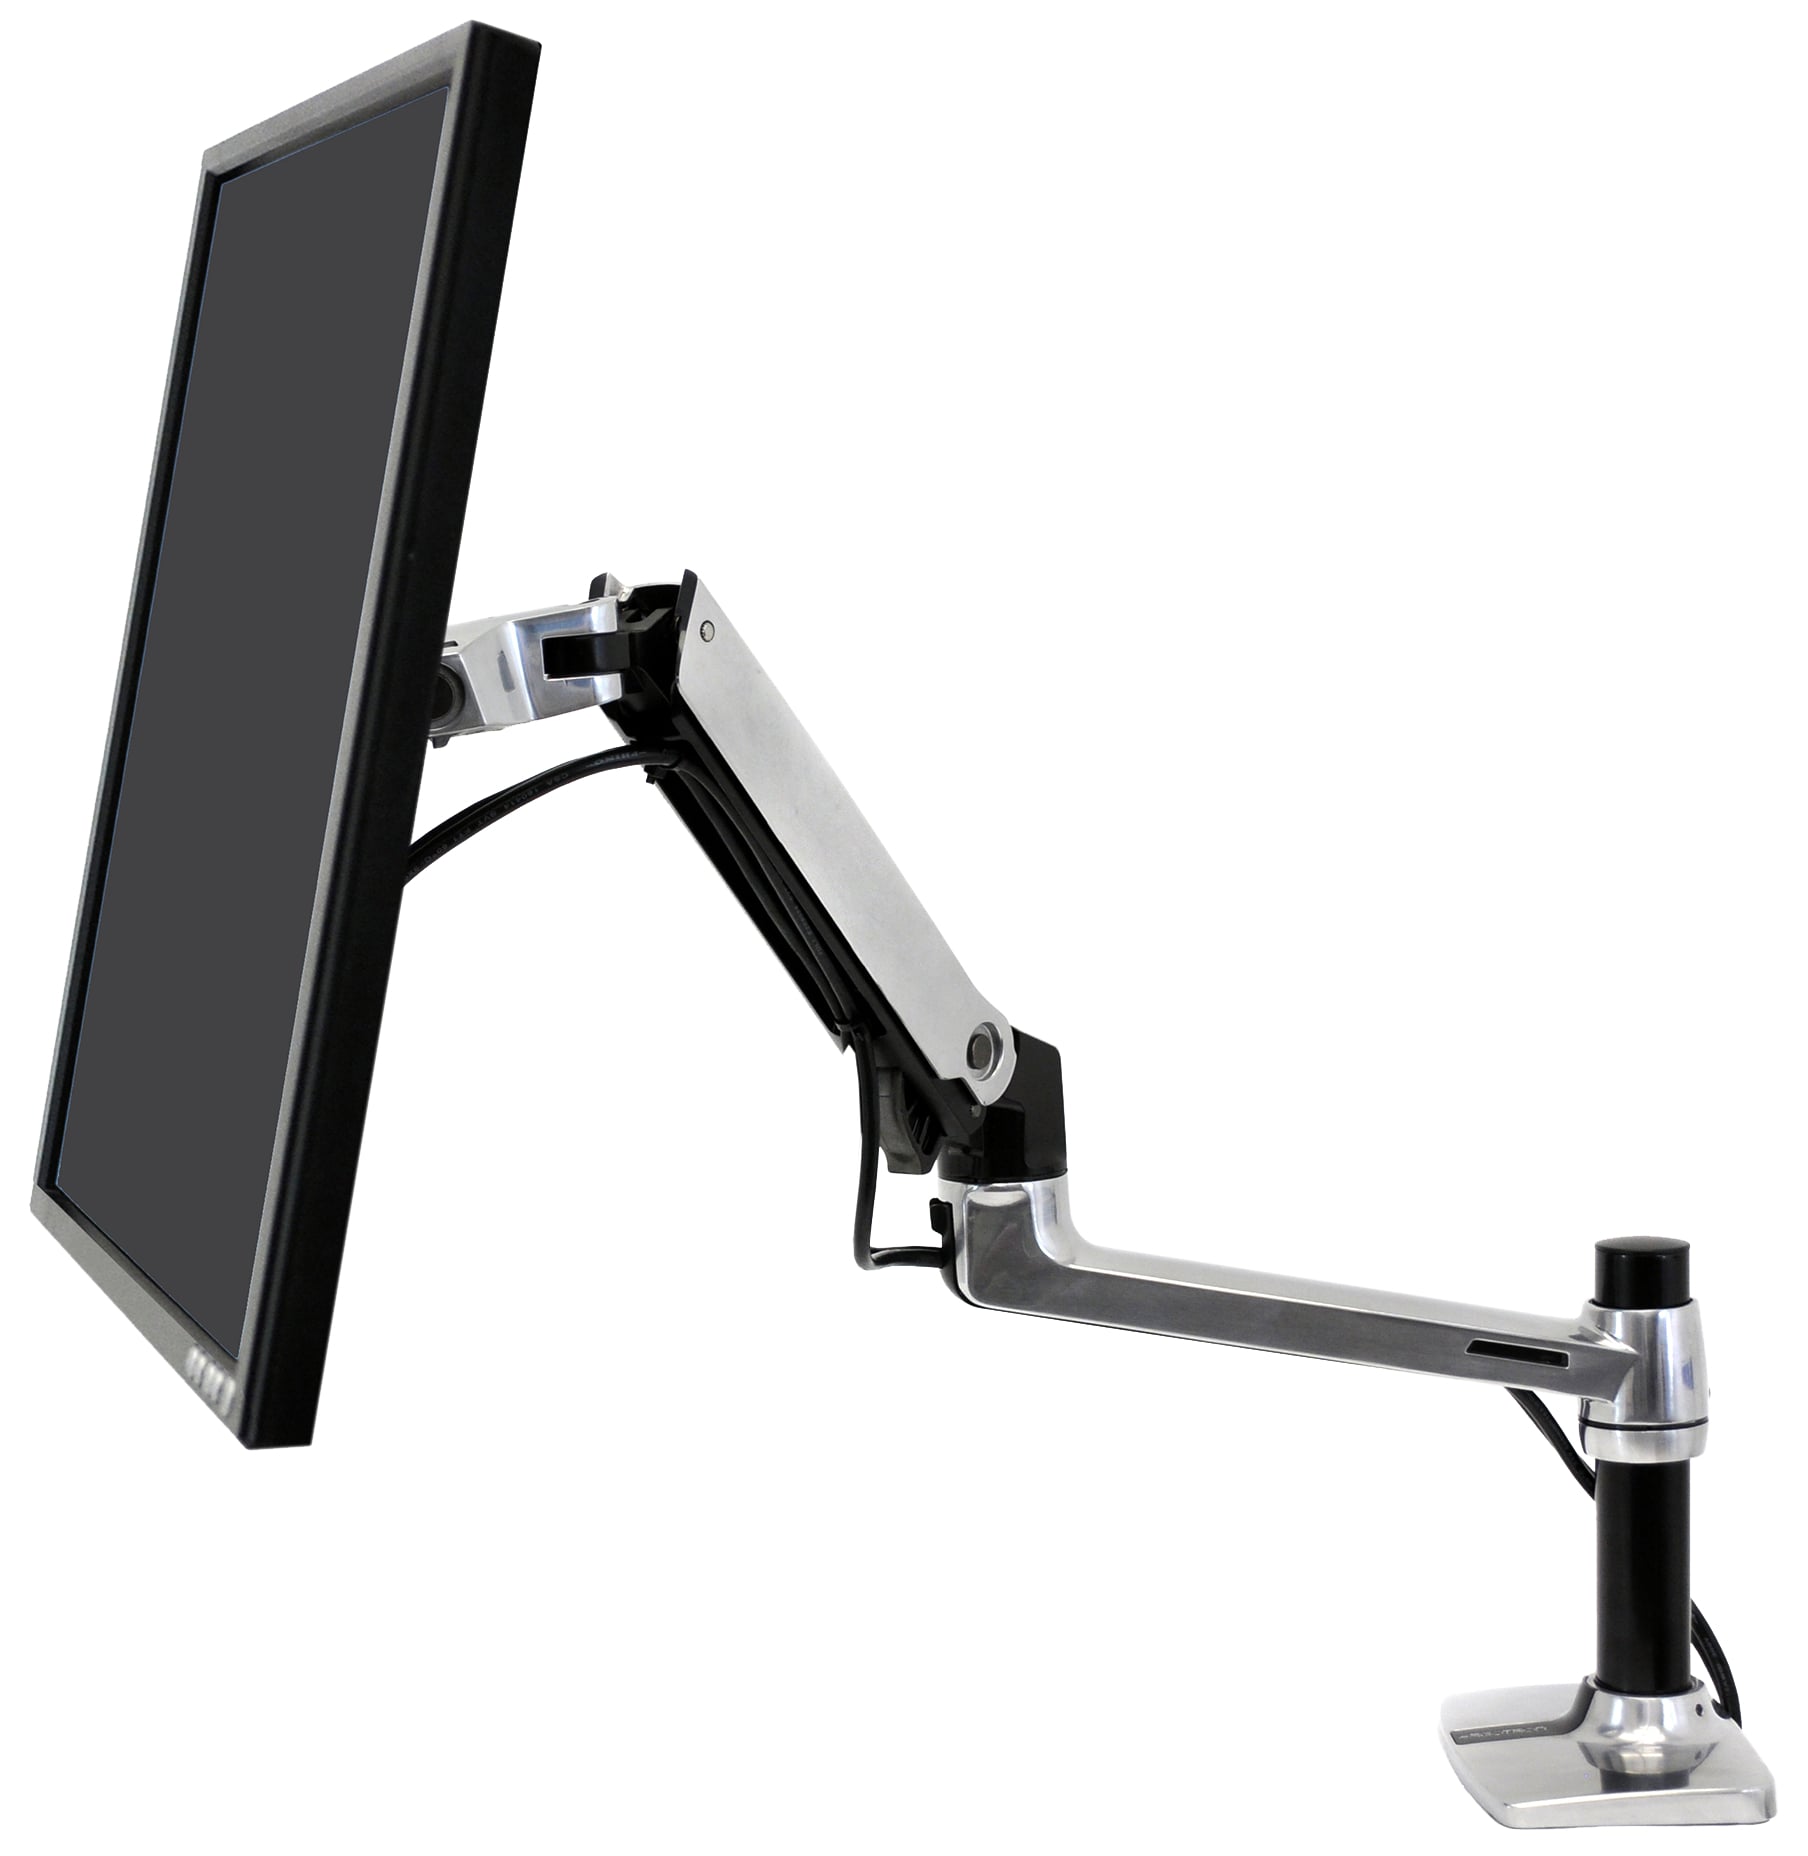 Product  Ergotron LX mounting kit - for LCD display - polished